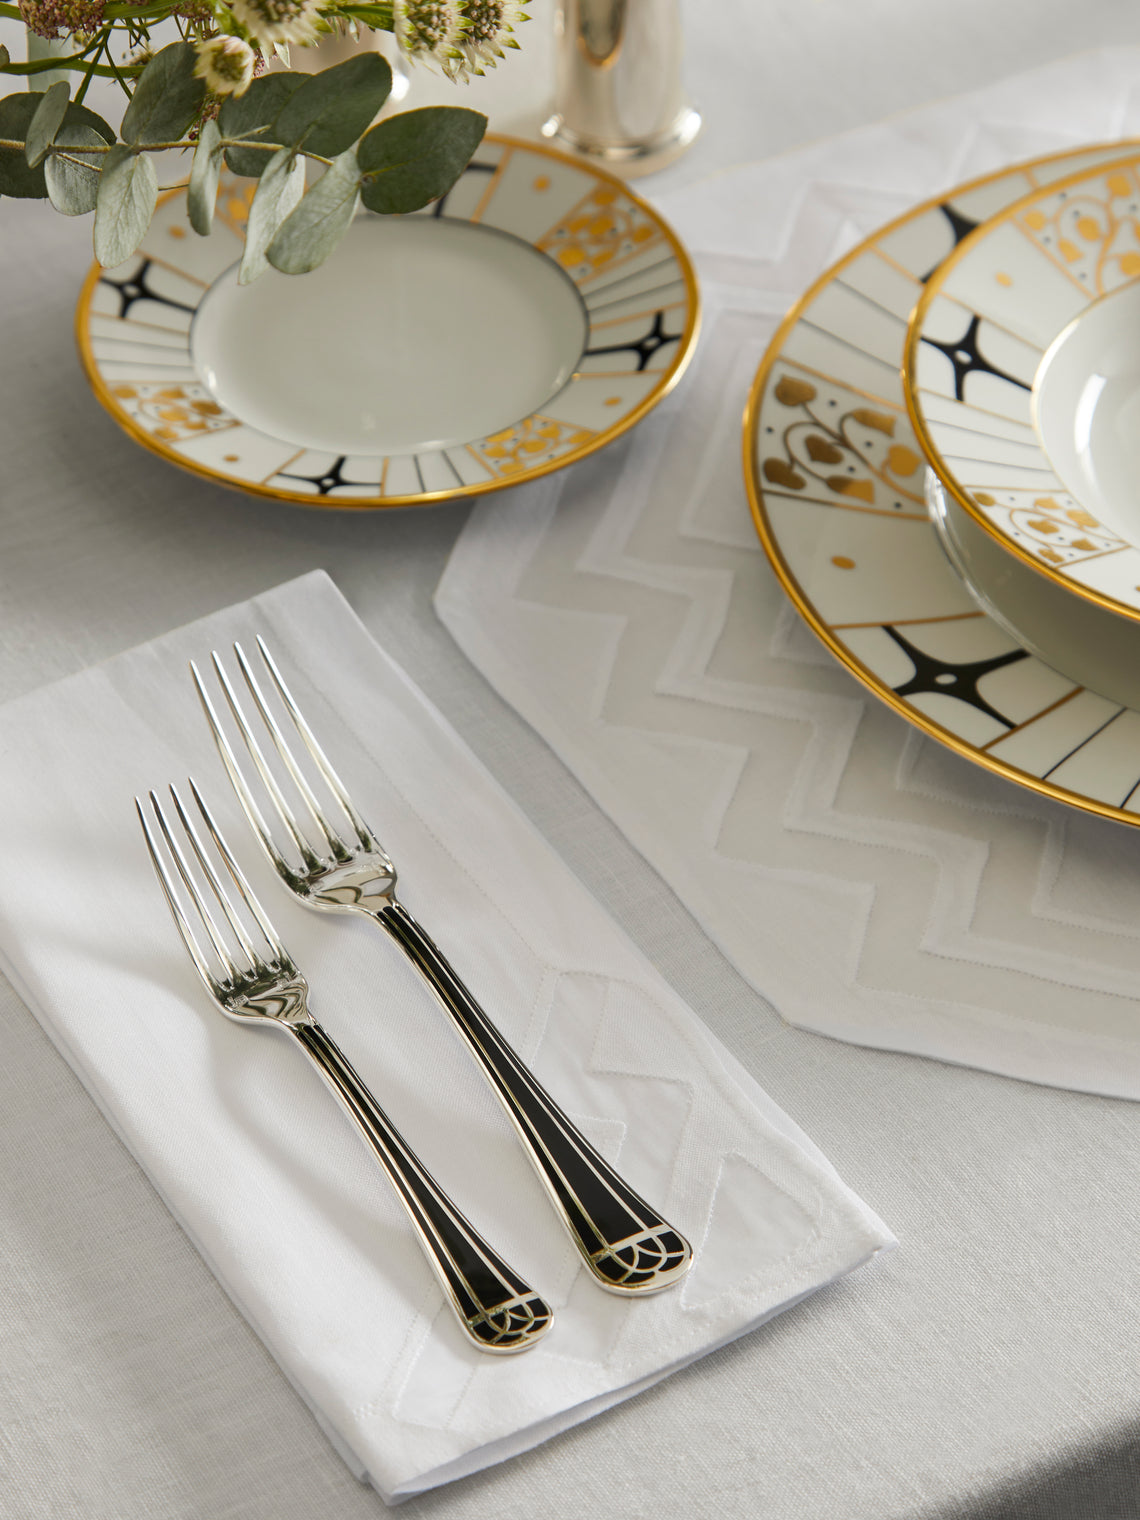 Taf Firenze - Punte Hand-Embroidered Linen Placemats and Napkins (Set of 6) - White - ABASK